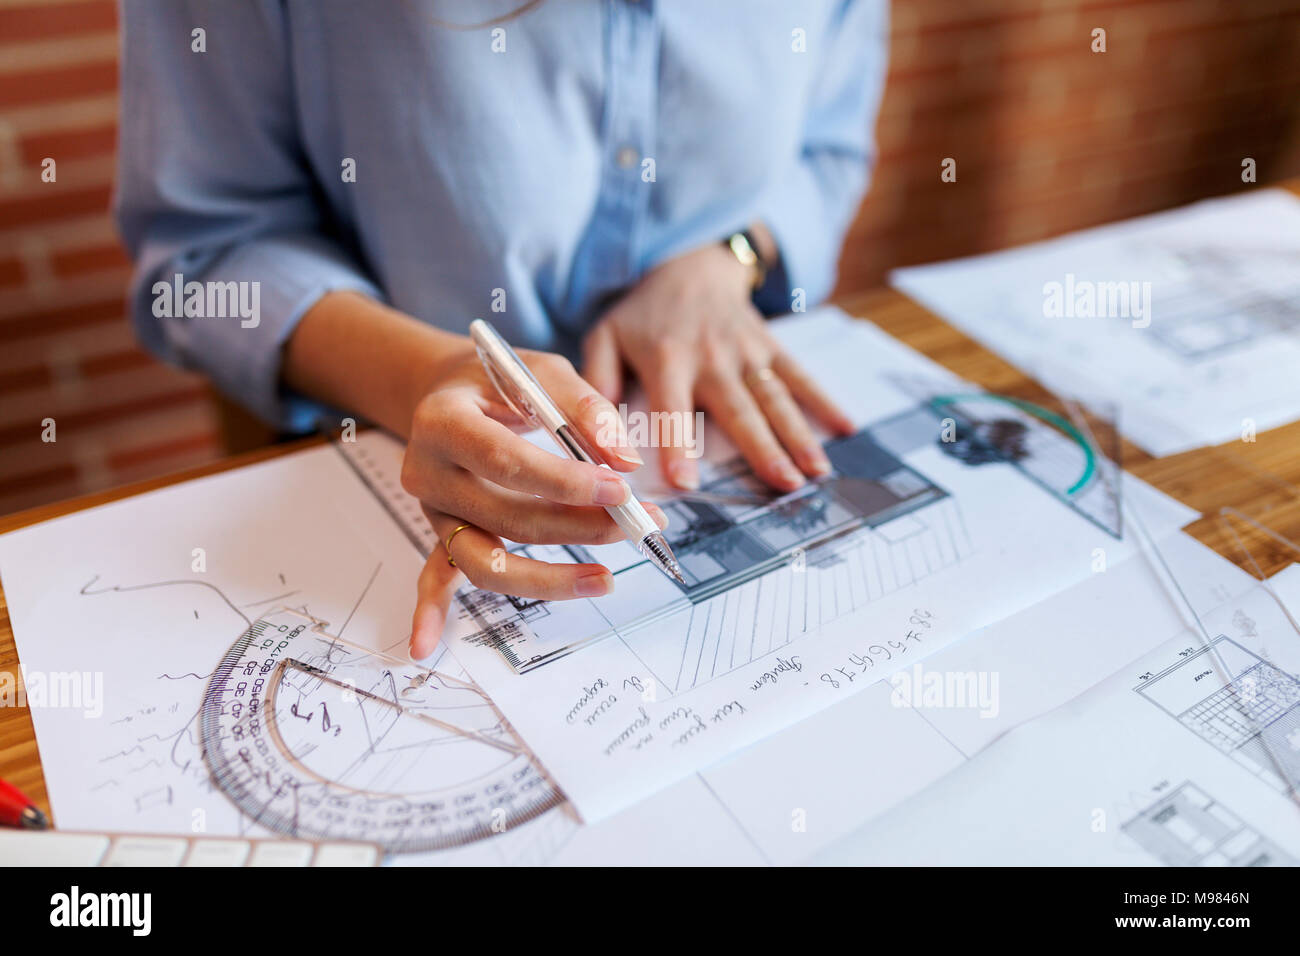 Young woman working in architecture office, drawing blueprints Stock Photo